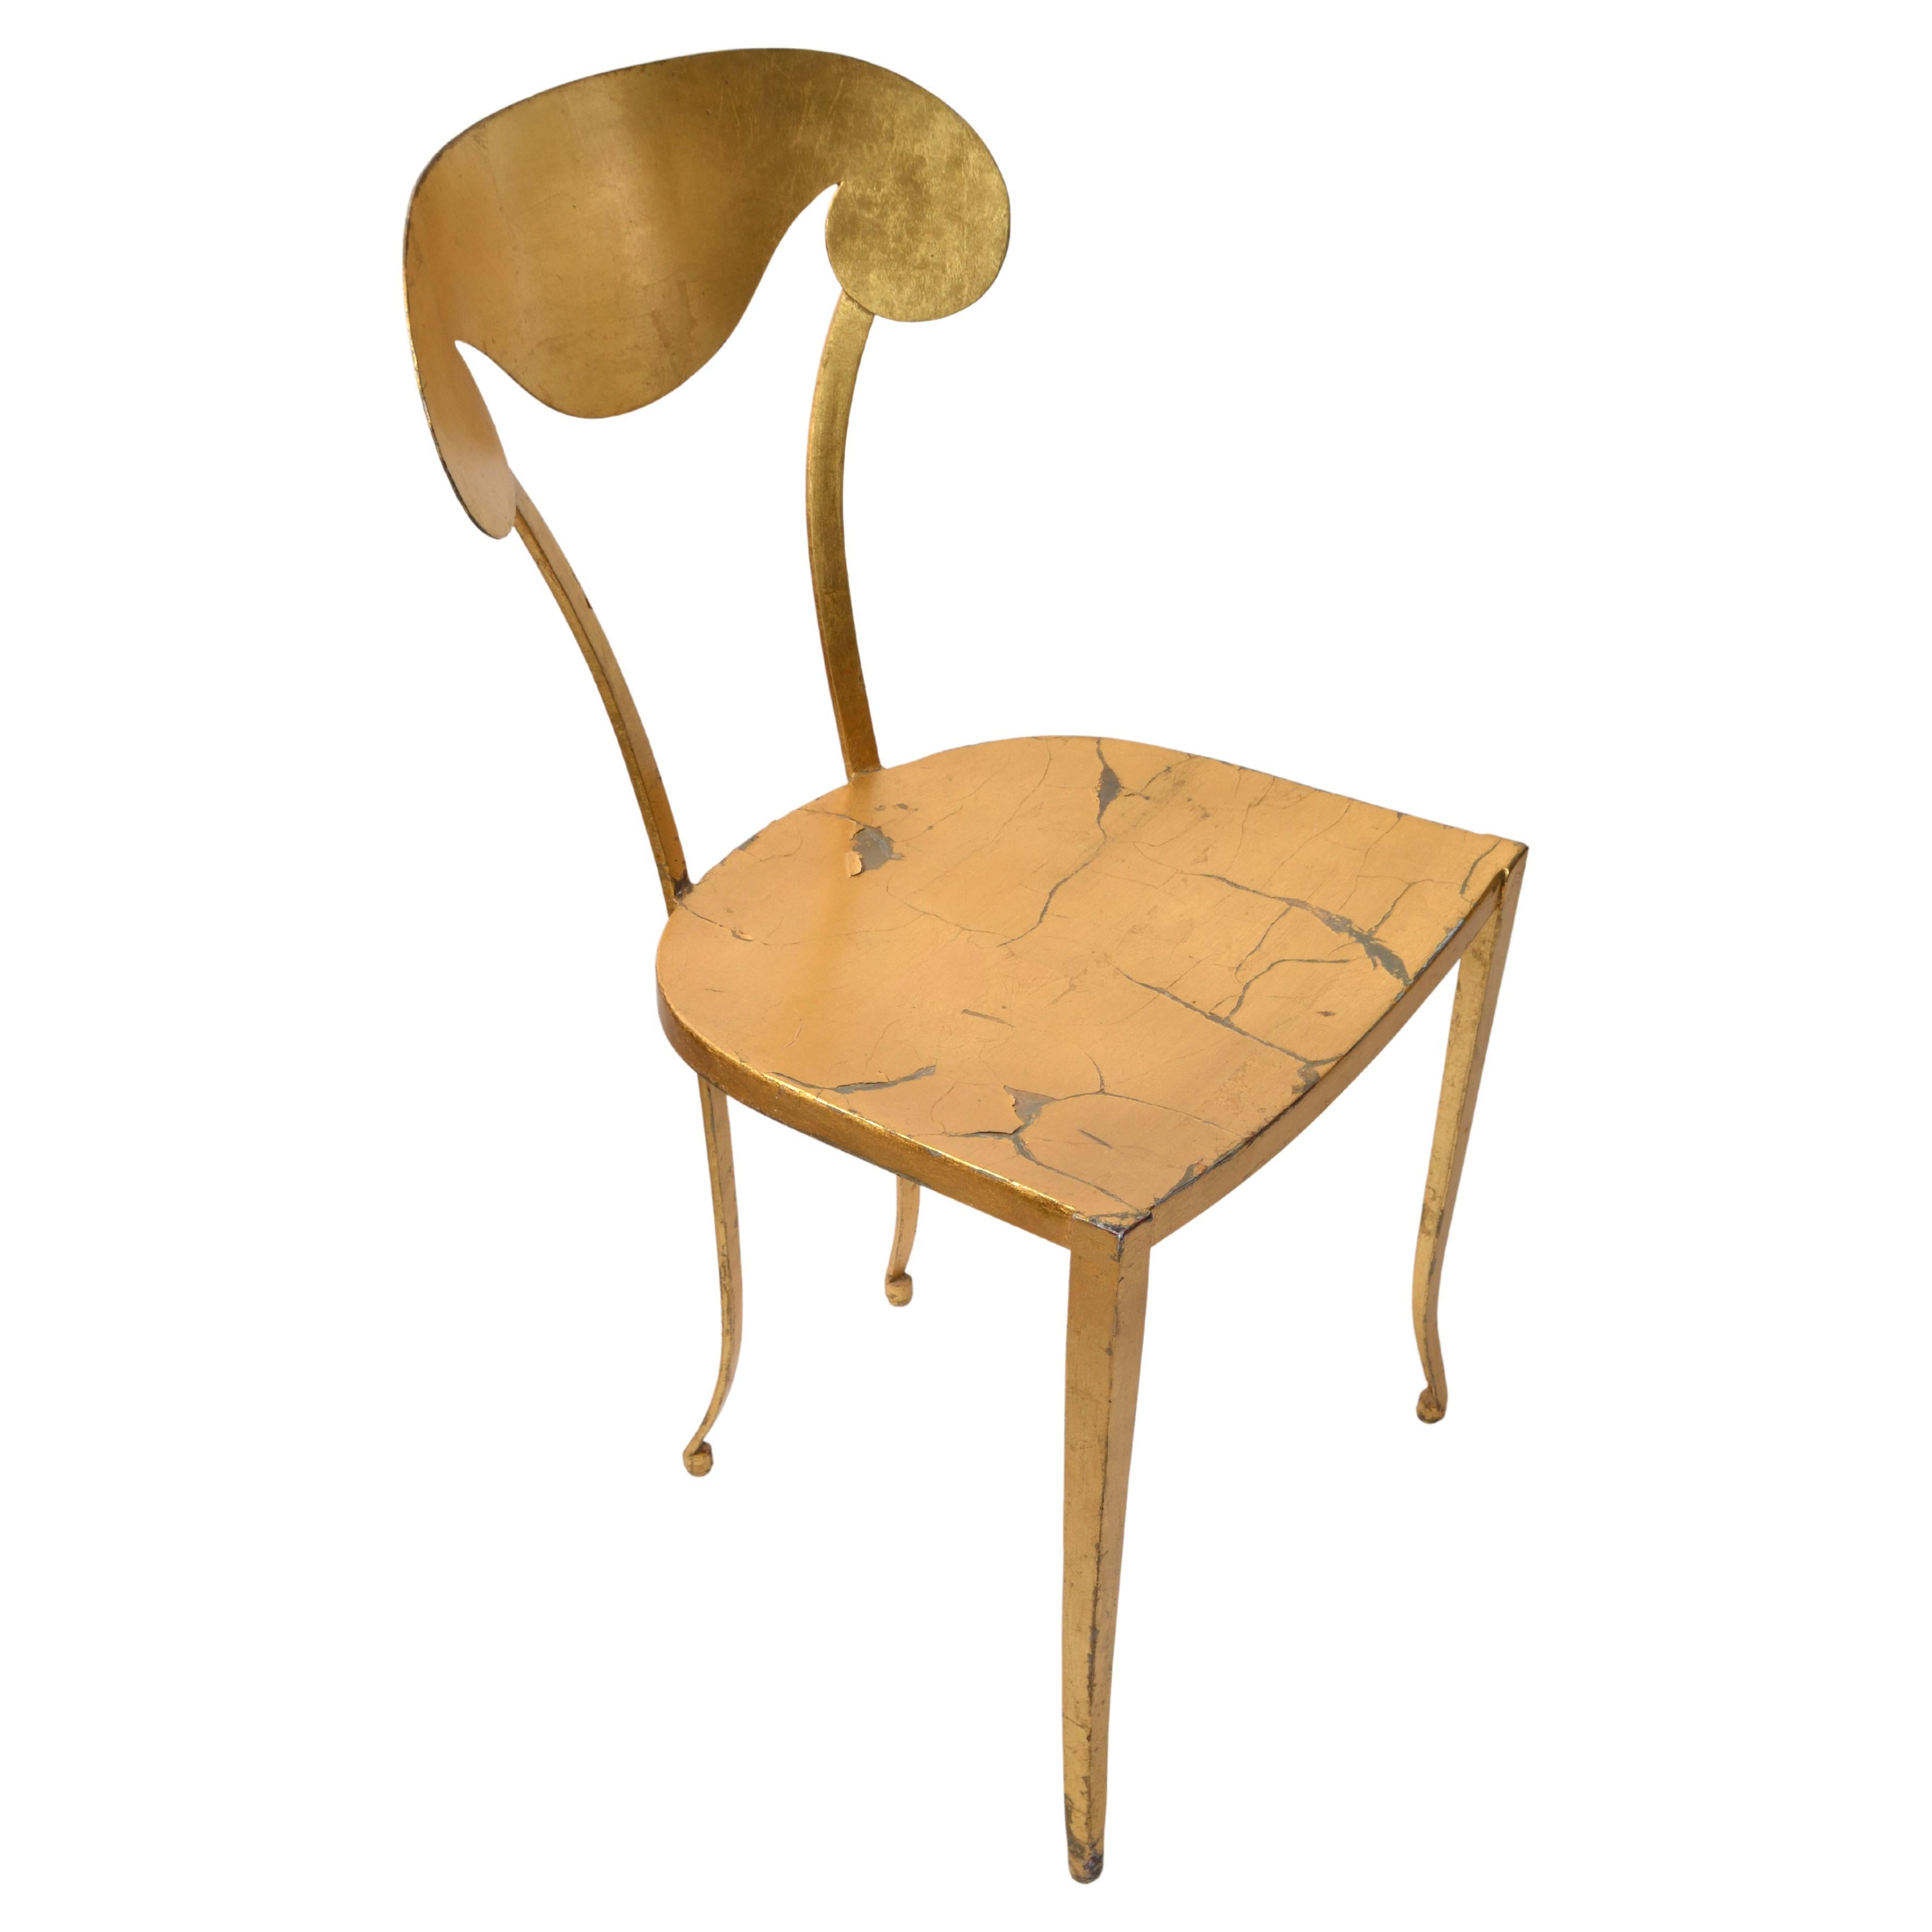 Artistic Italian Art Deco Style hand painted and handcrafted gold leaf Steel vanity, side or desk chair in distressed golden finish. 
Sculptural shaped backrest and legs makes this Side Chair very elegant.
Even though it is a steel chair it is